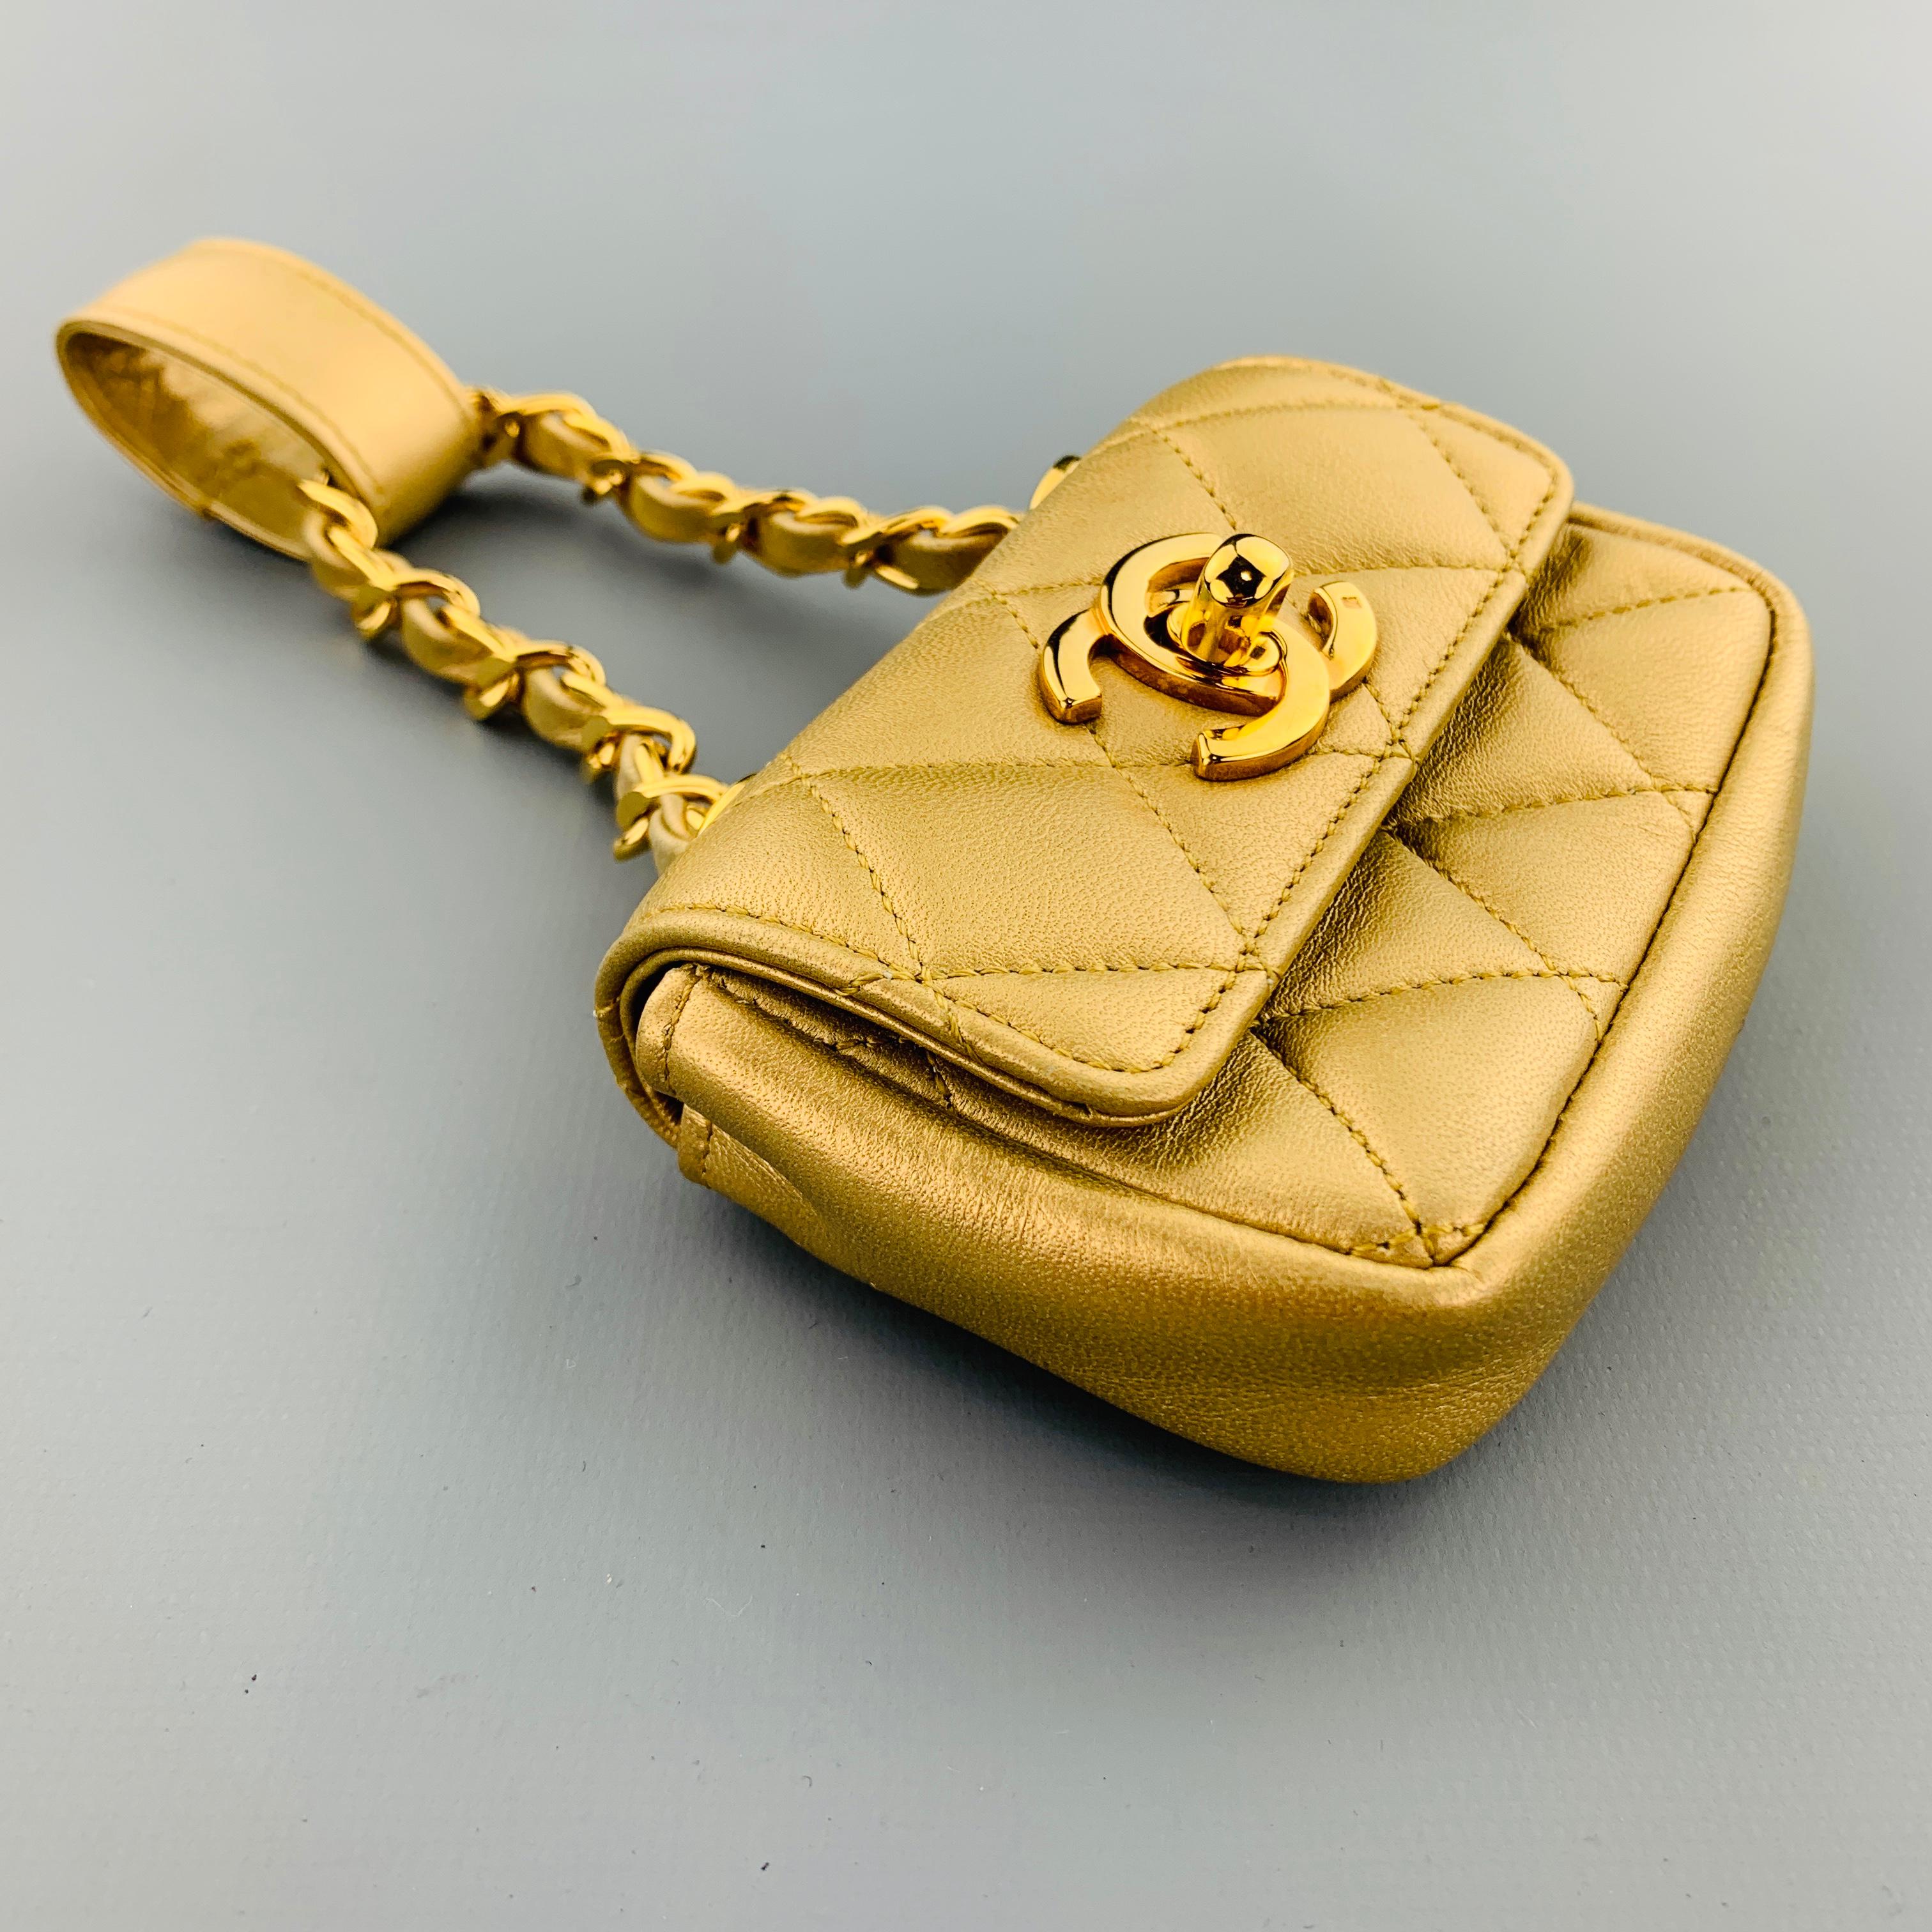 Women's or Men's CHANEL Vintage Gold Metallic Leather Quilted Mini Purse Charm Pouch